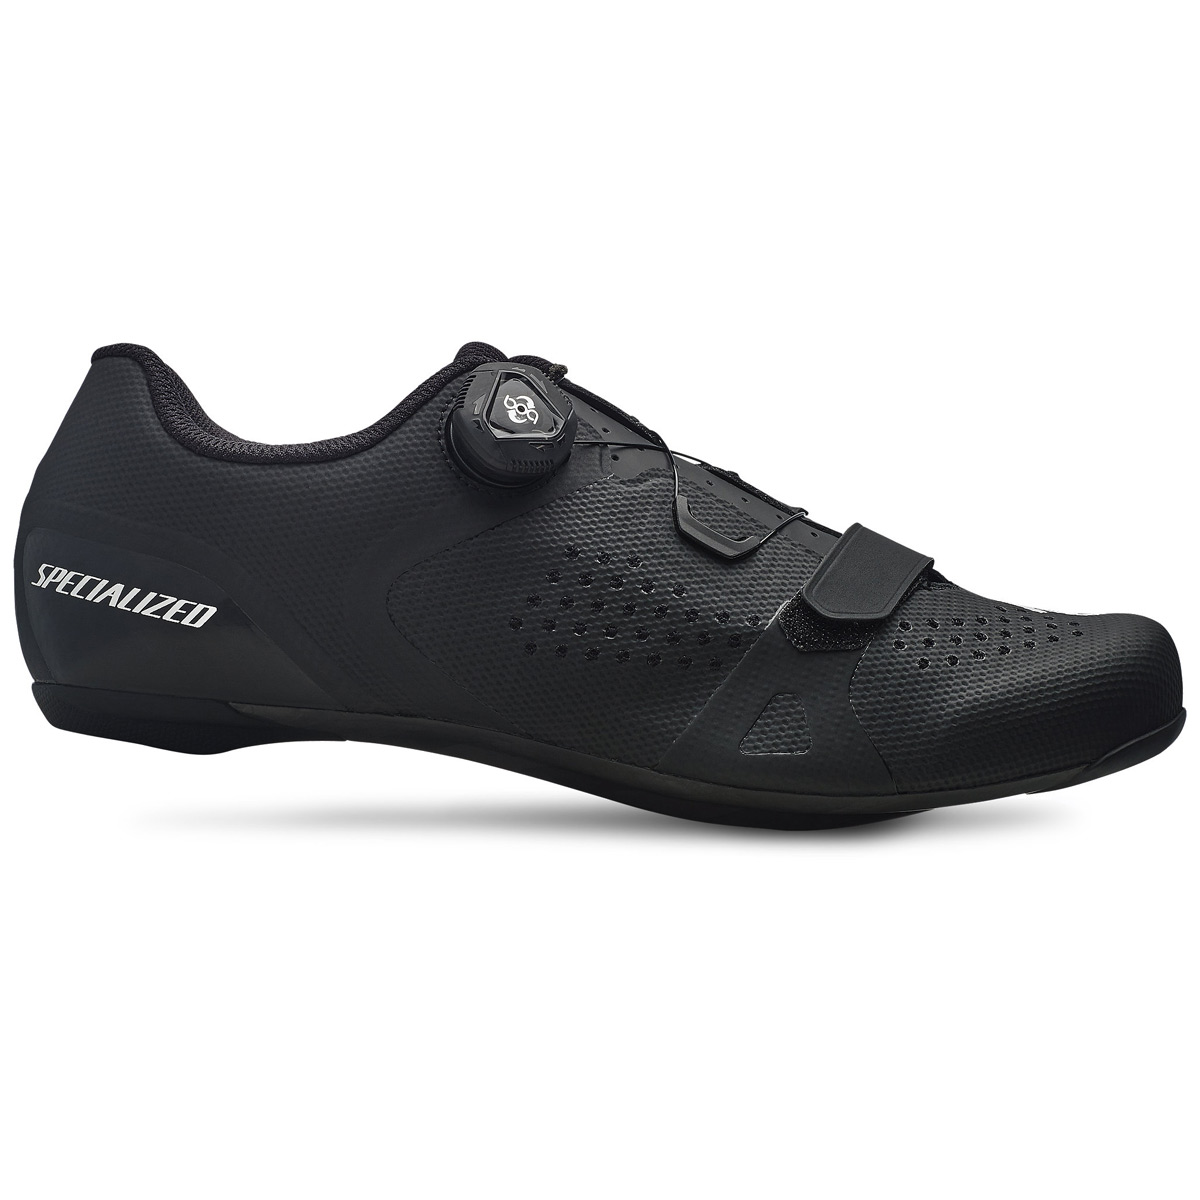 CHAUSSURES SPECIALIZED TORCH 2.0 LARGE